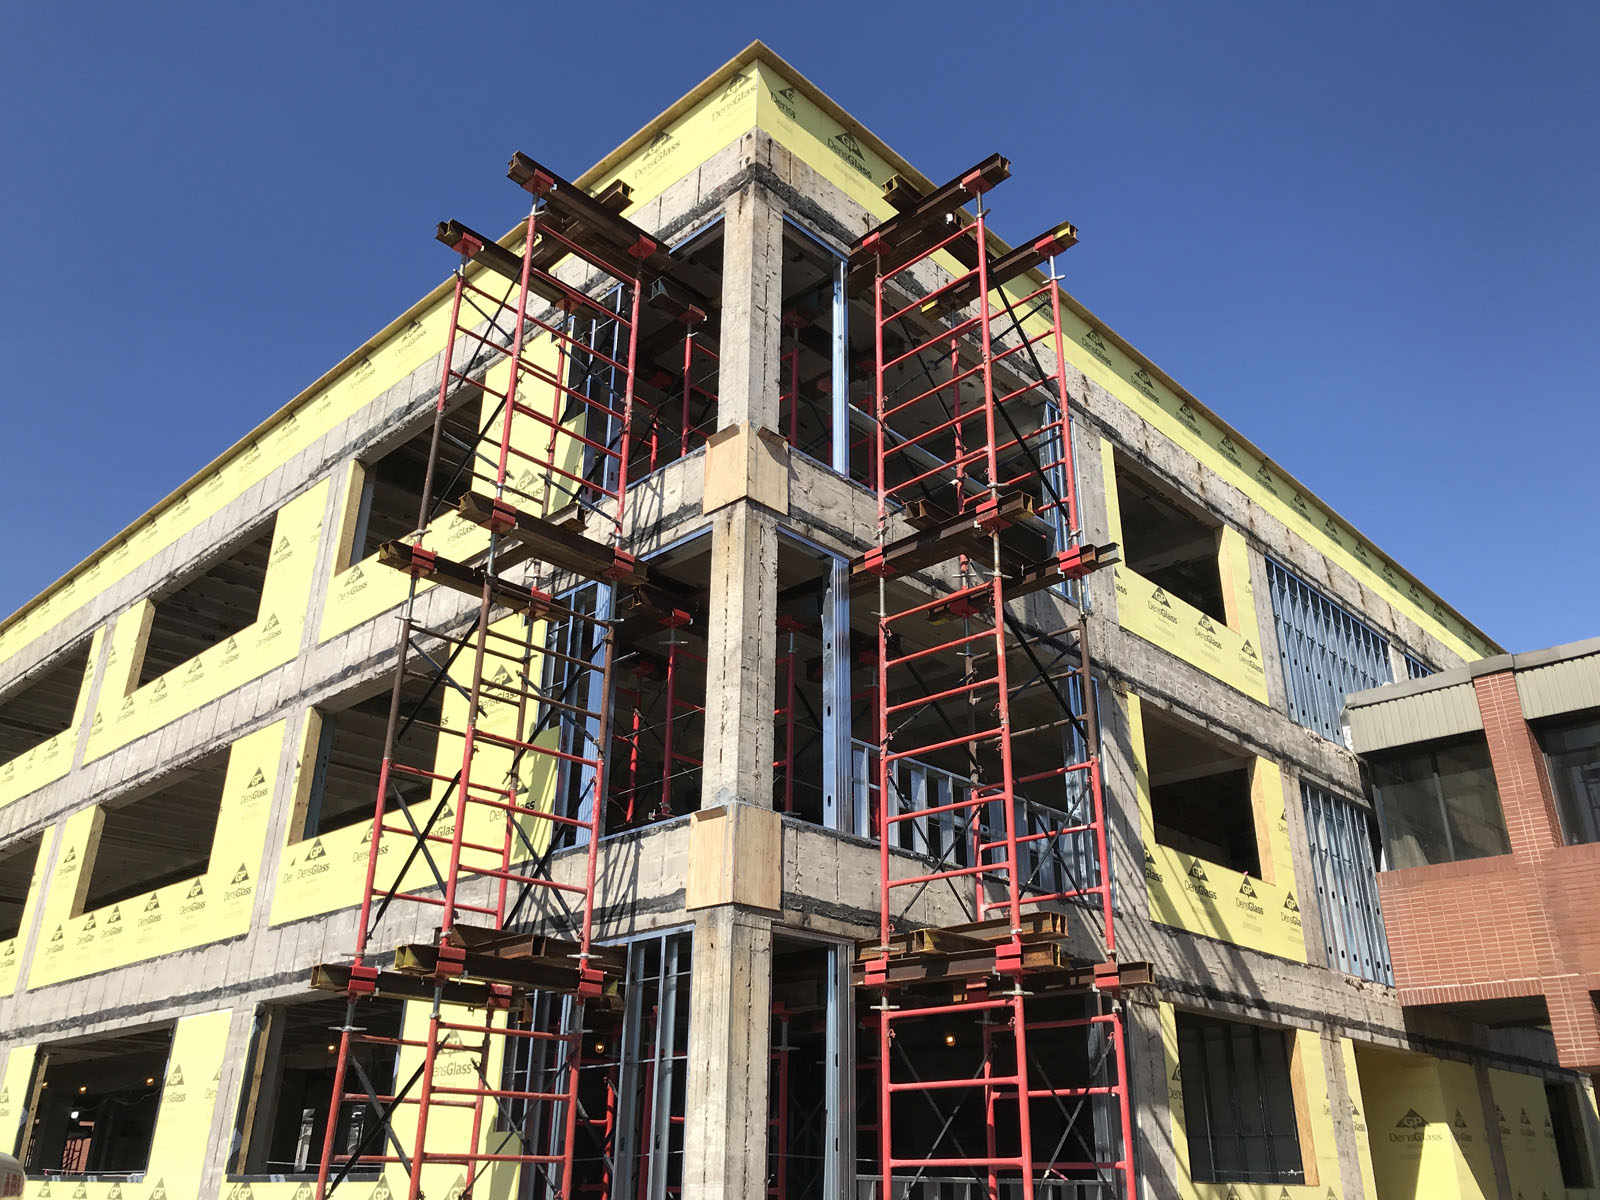 Scaffold, scaffolding, scaffolding, rent, rents, scaffolding rental, construction, ladders, equipment rental, scaffolding Philadelphia, scaffold PA, philly, building materials, NJ, DE, MD, NY, renting, leasing, inspection, general contractor, masonry, 215 743-2200, superior scaffold, electrical, HVAC, swing stage, swings, suspended scaffold, overhead protection, canopy, transport platform, lift, hoist, mast climber, access, buck hoist, upenn, u of p, pennovation